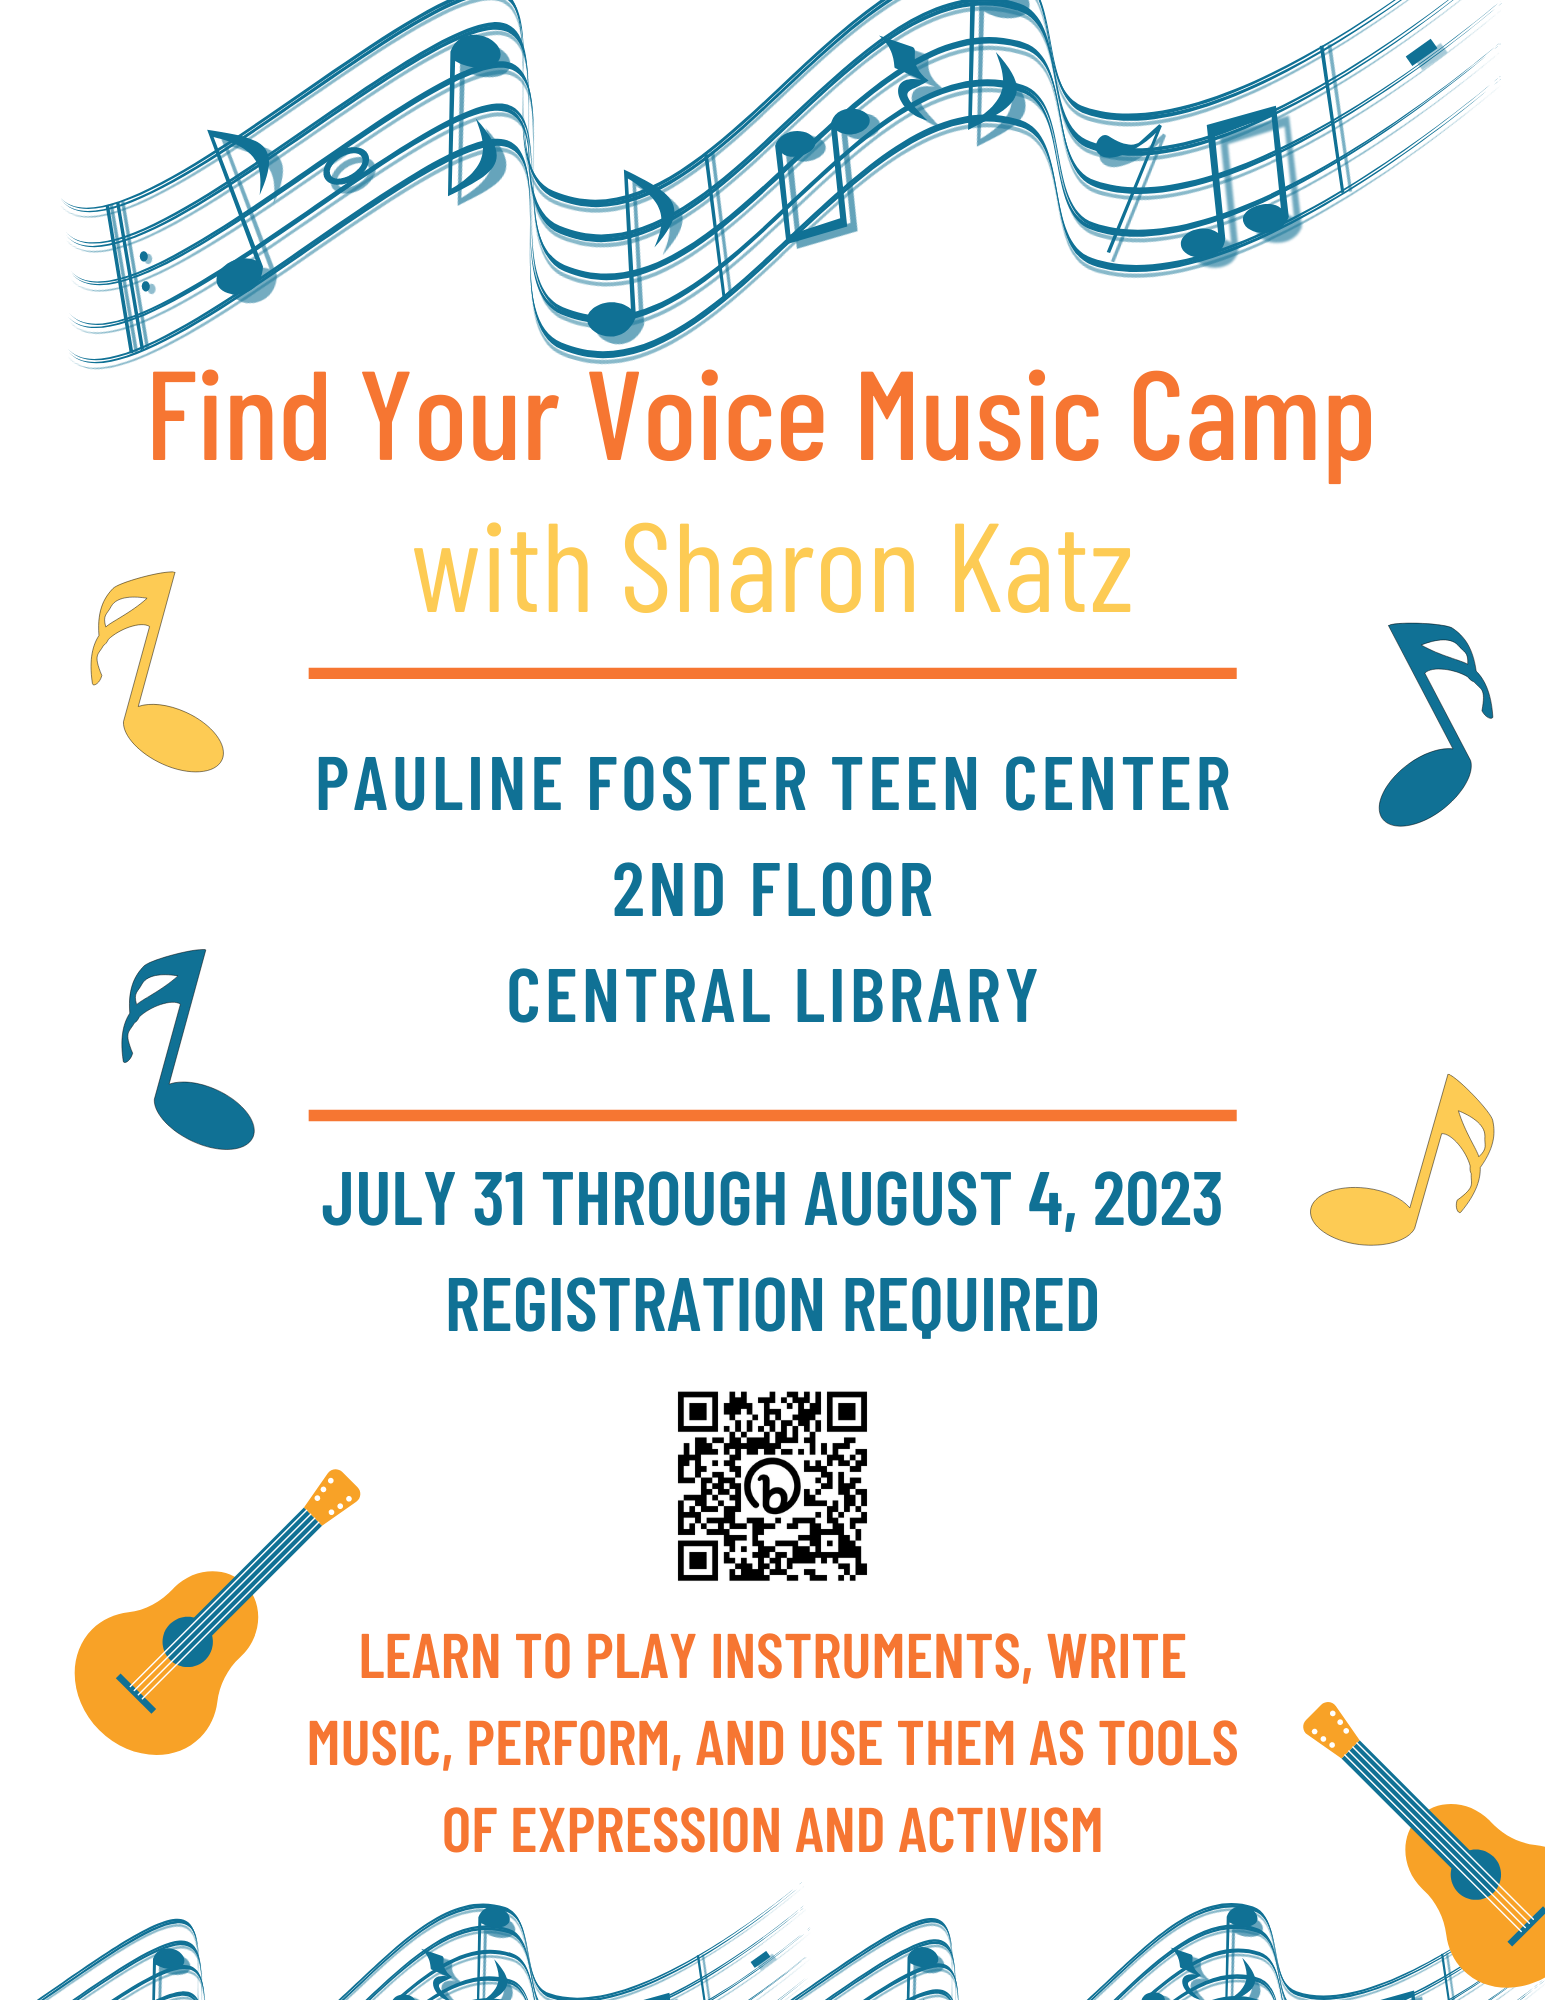 Find Your Voice Music Camp with Sharon Katz. Pauline Foster Teen Center, 2nd Floor, Central Library. July 31st through August 4th.